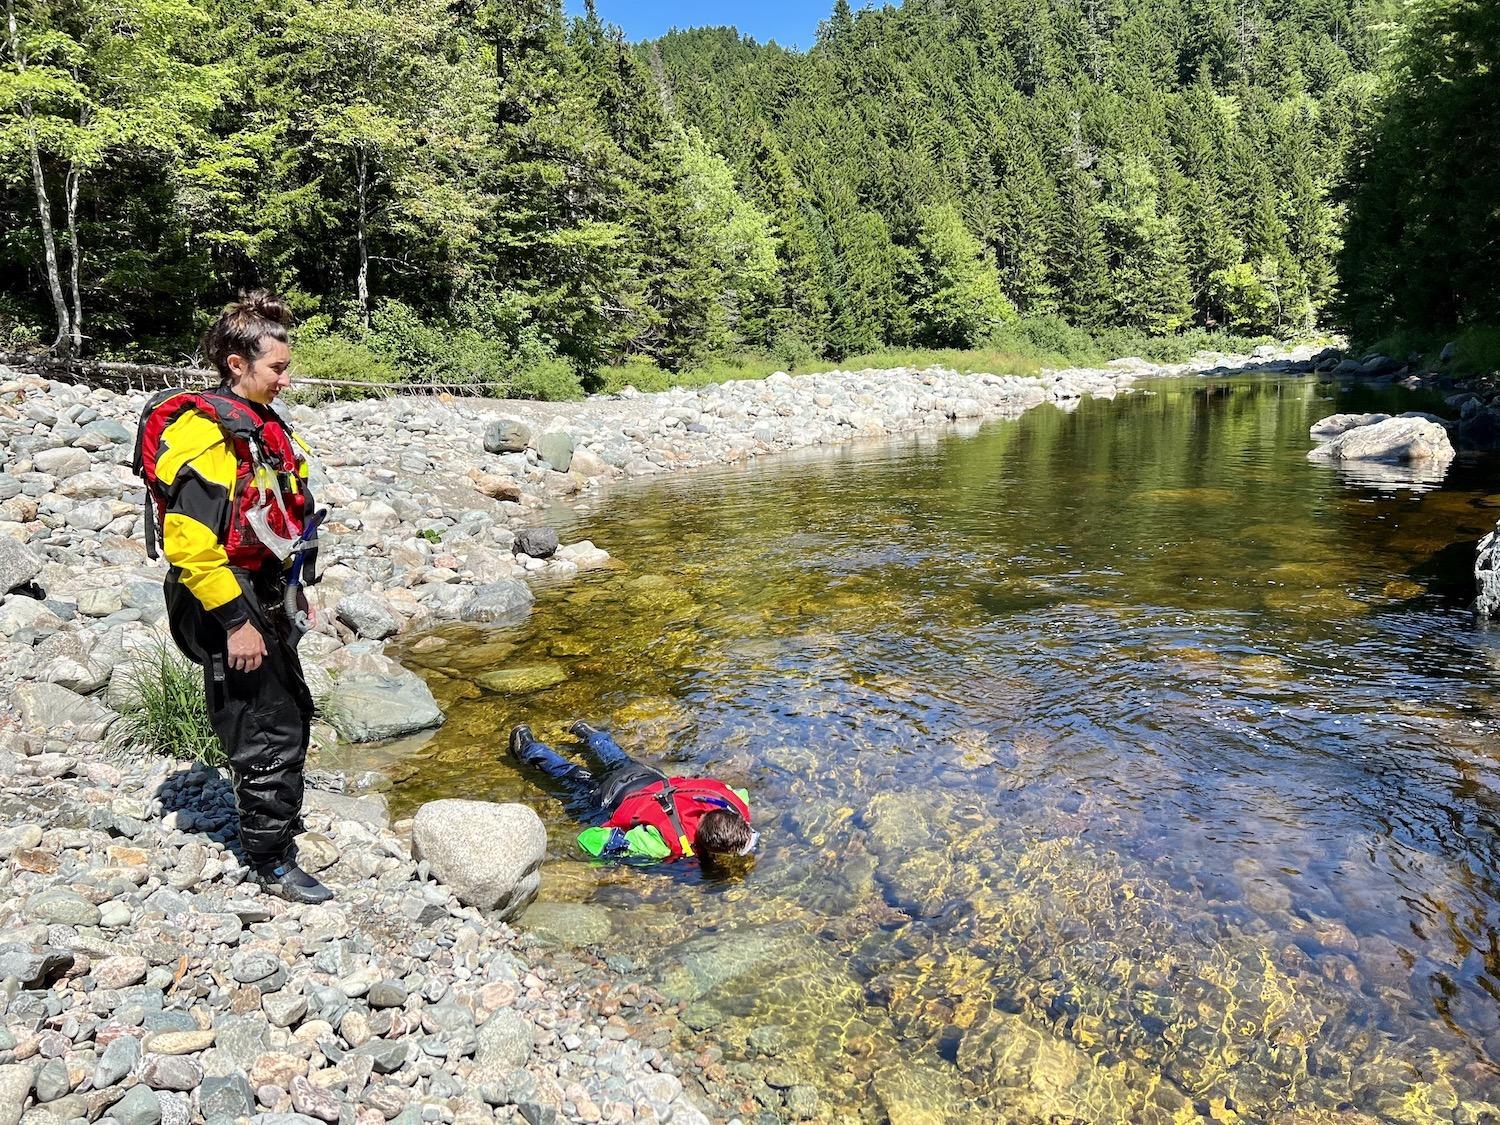 Danielle Latendresse stays on shore as John Robinson quietly searches for salmon.